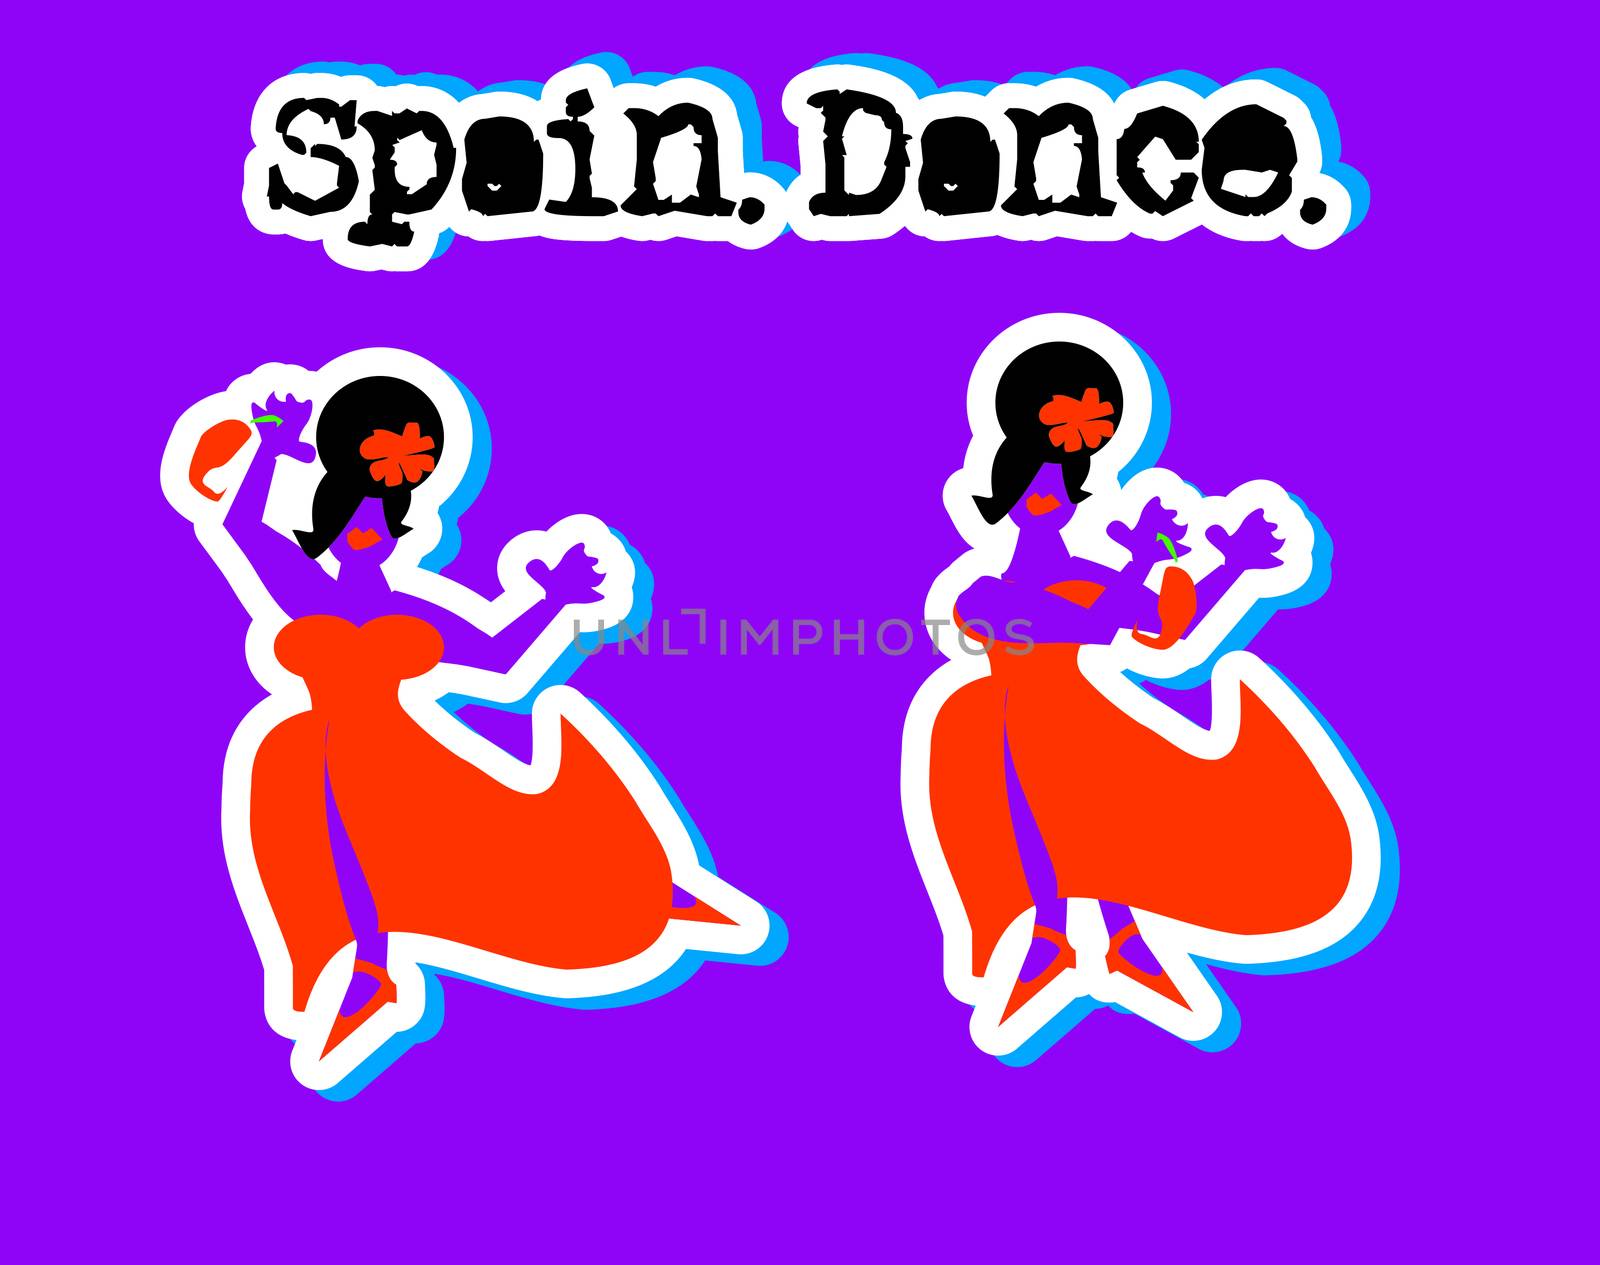 Spanish Woman in Red Dress Dancing Icons Set by IconsJewelry